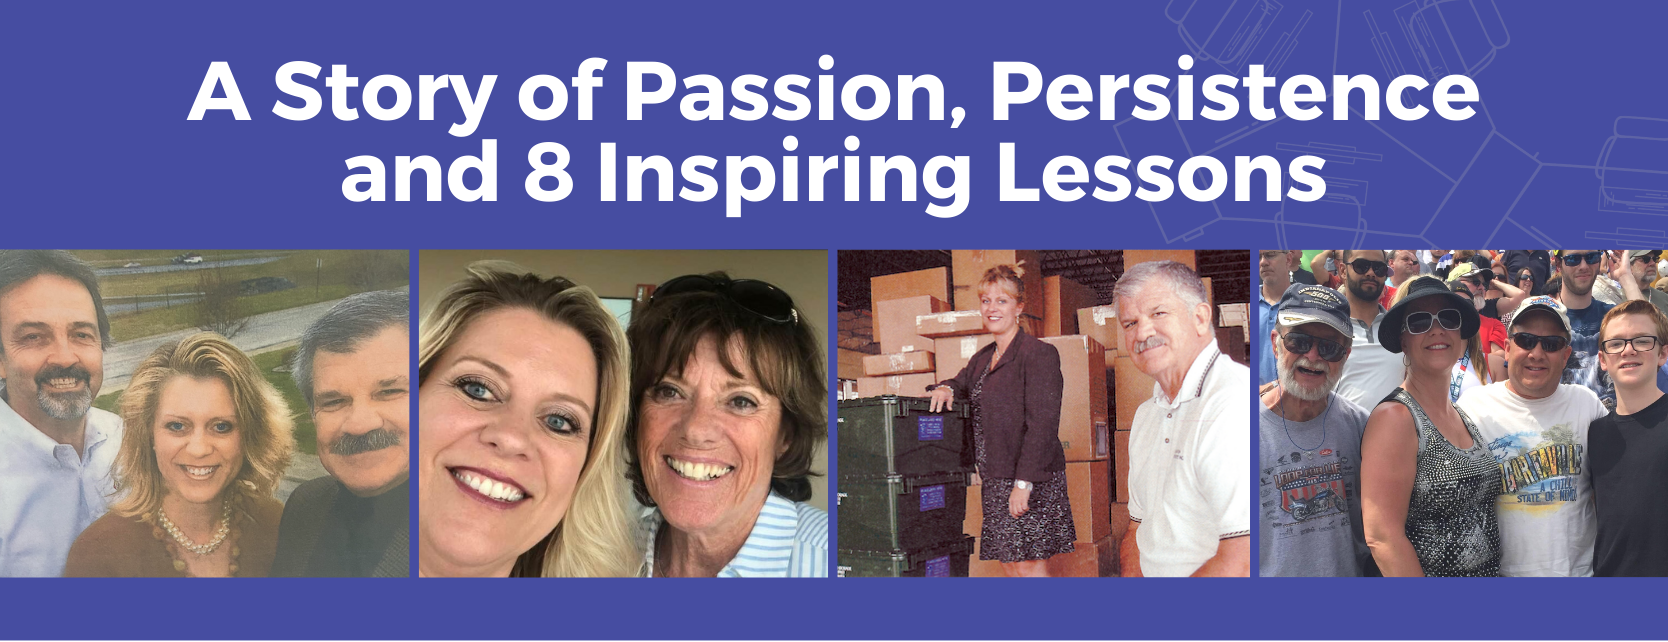 A Story of Passion, Persistence, and 8 Inspiring Lessons